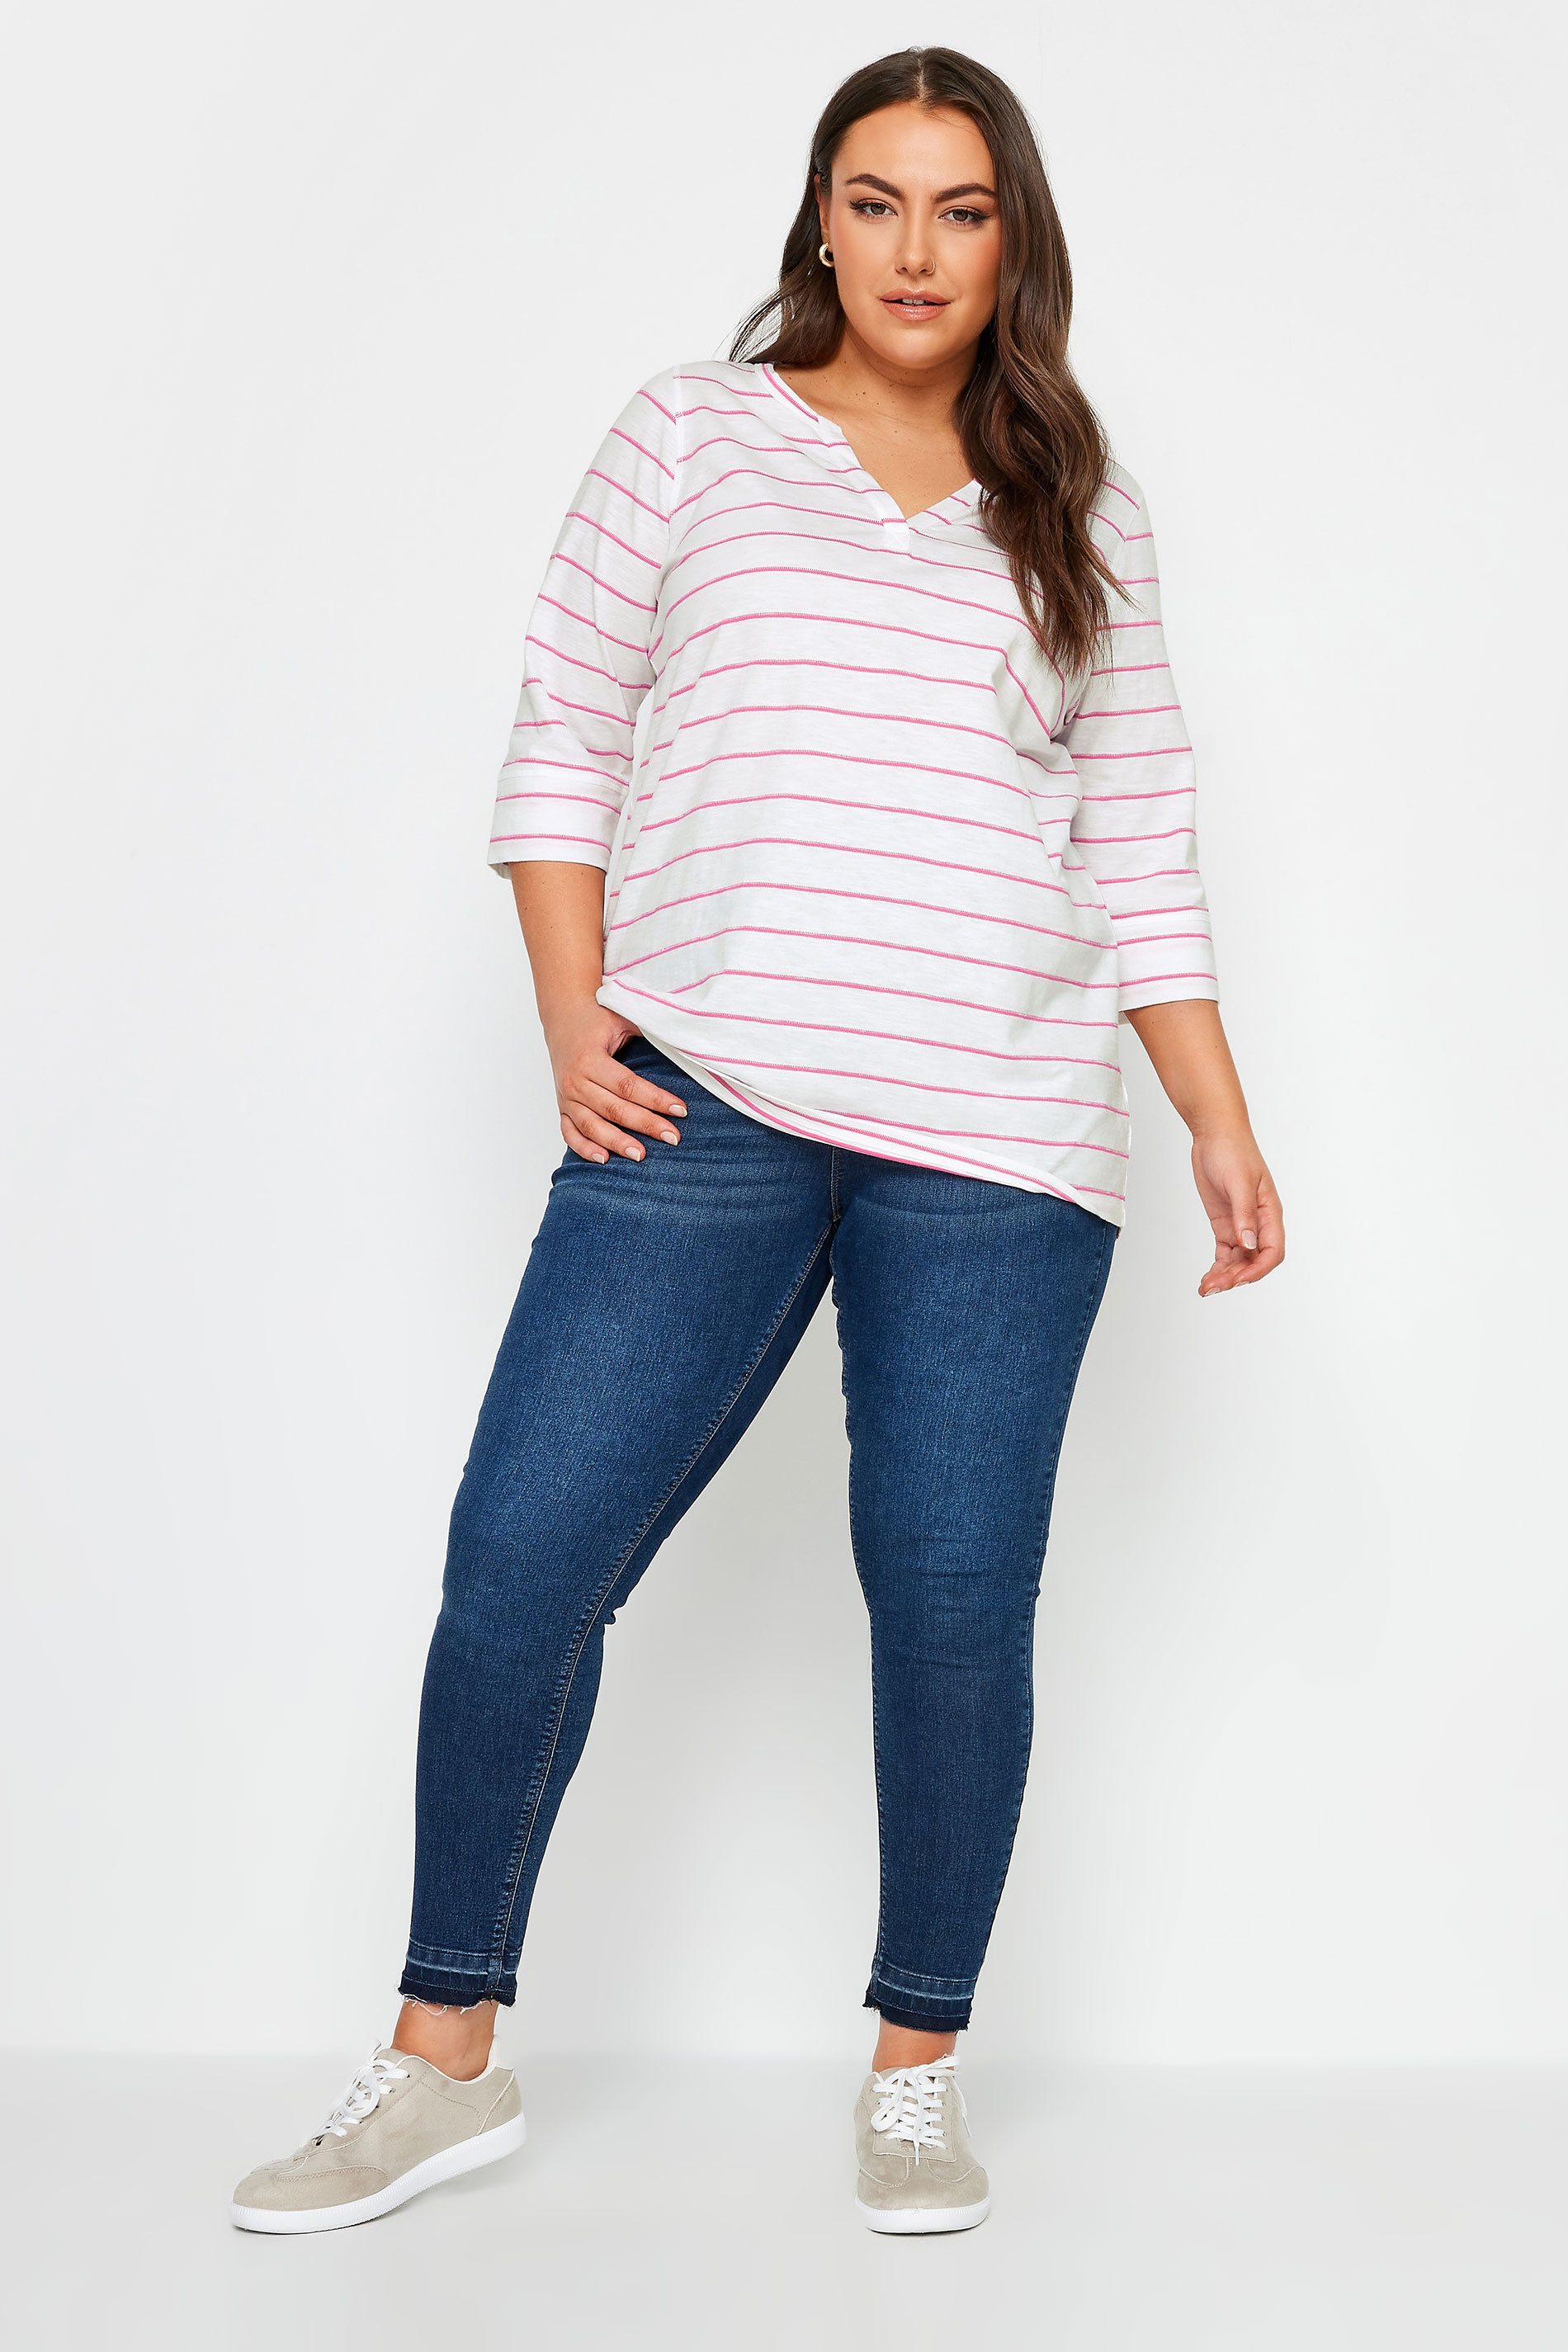 YOURS Plus Size White & Pink Stripe Notch Neck Top | Yours Clothing 2